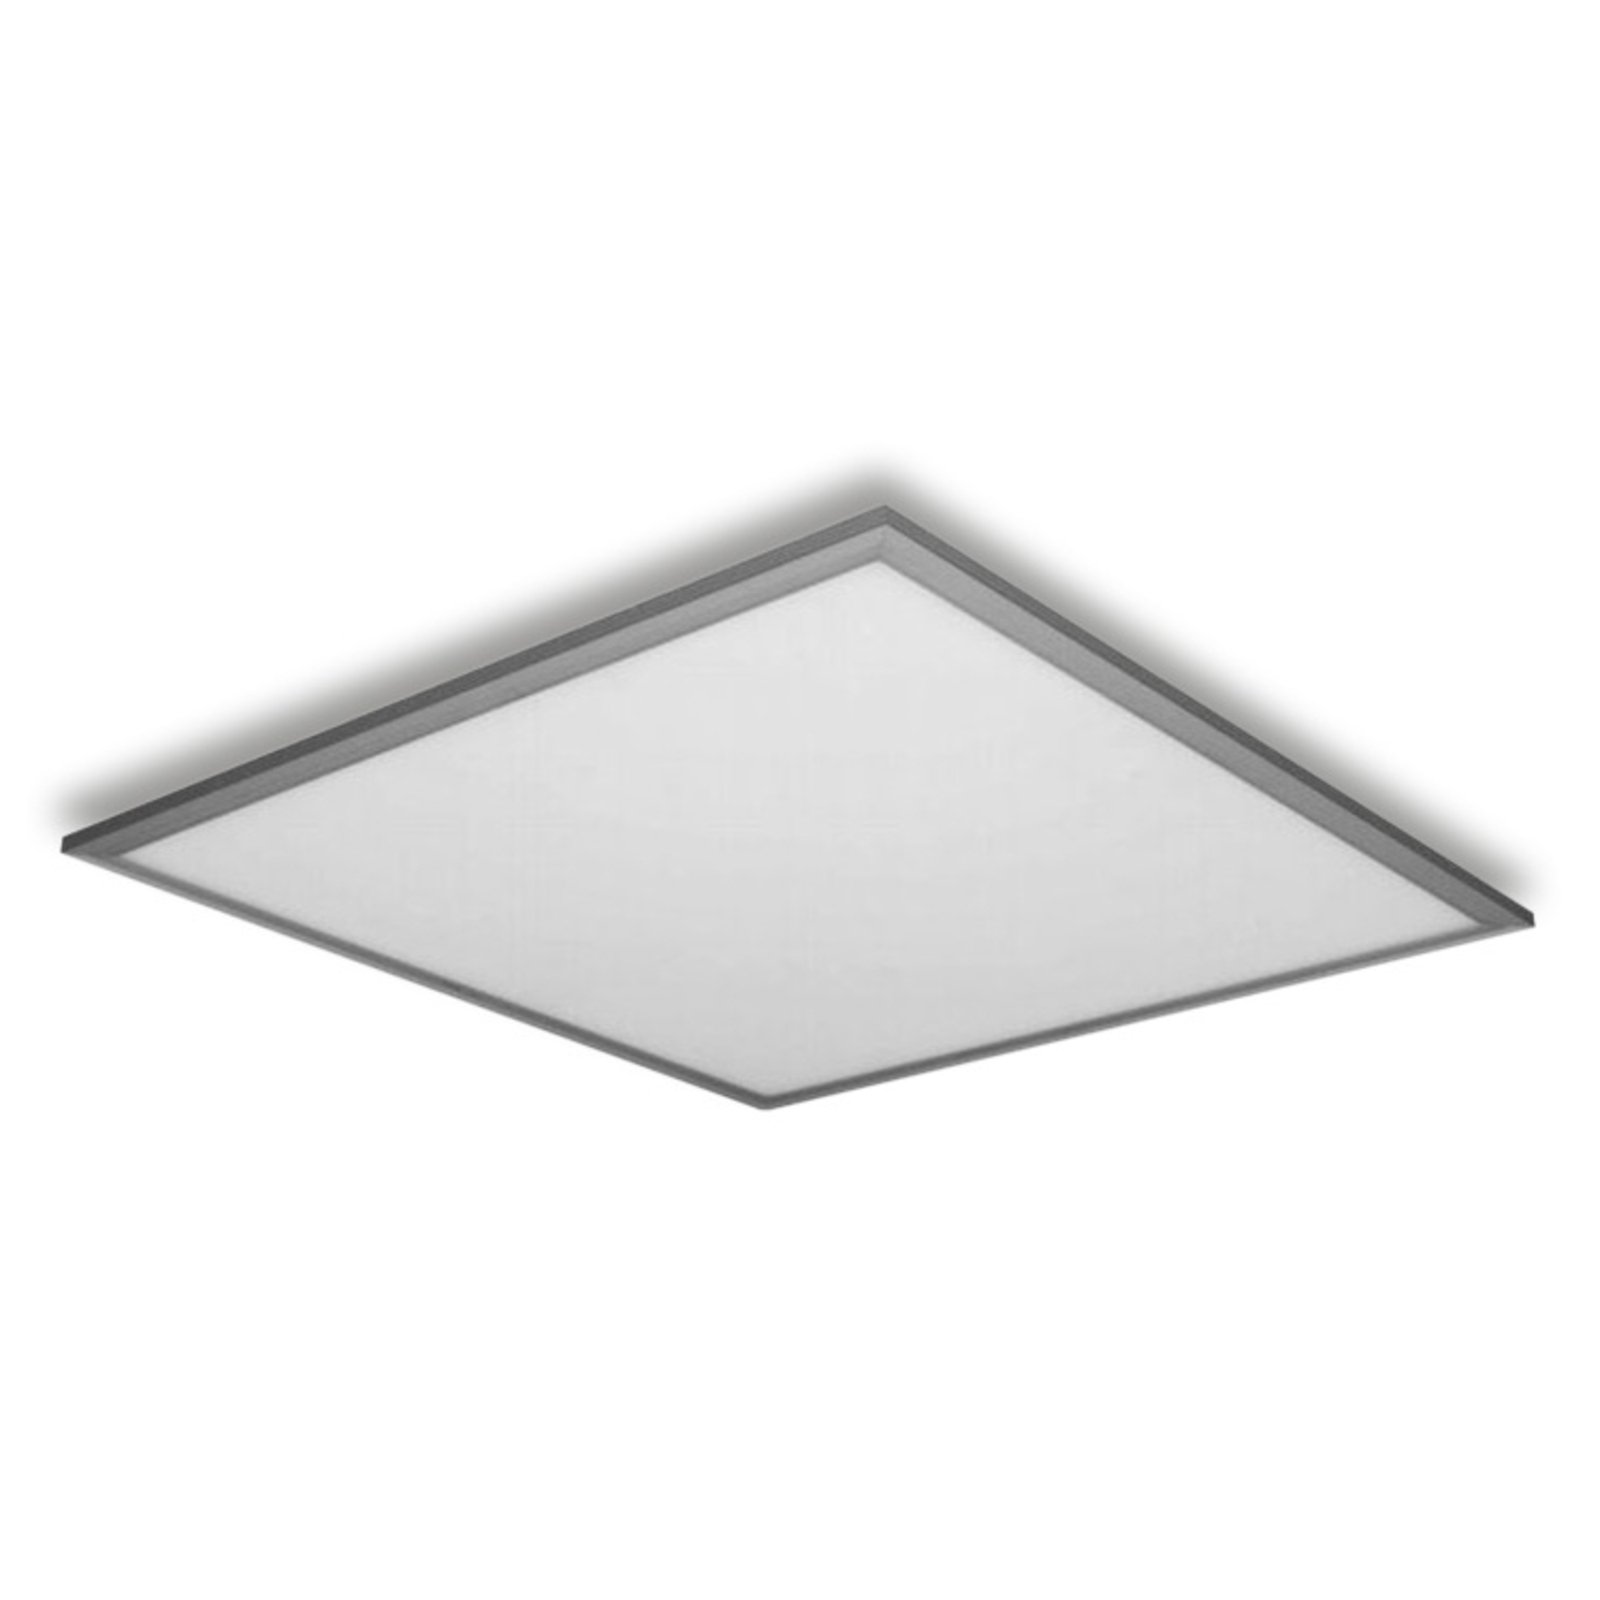 LED πάνελ All in One 62x62cm 3,800K, dimmable